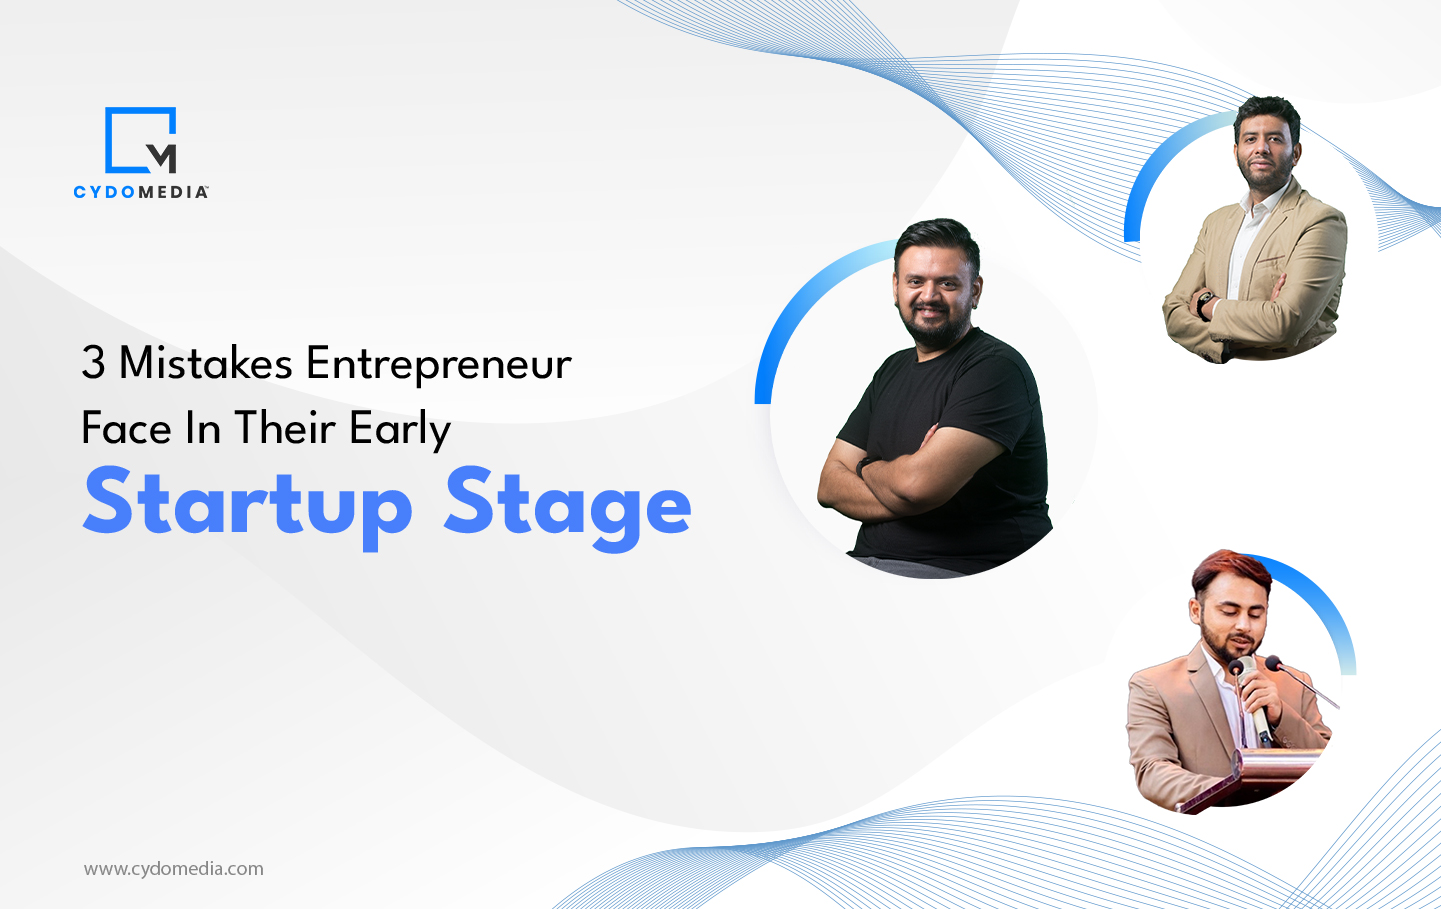 03 Experts Talk About The Mistakes That Entrepreneurs Face In Their Early Startup Stage